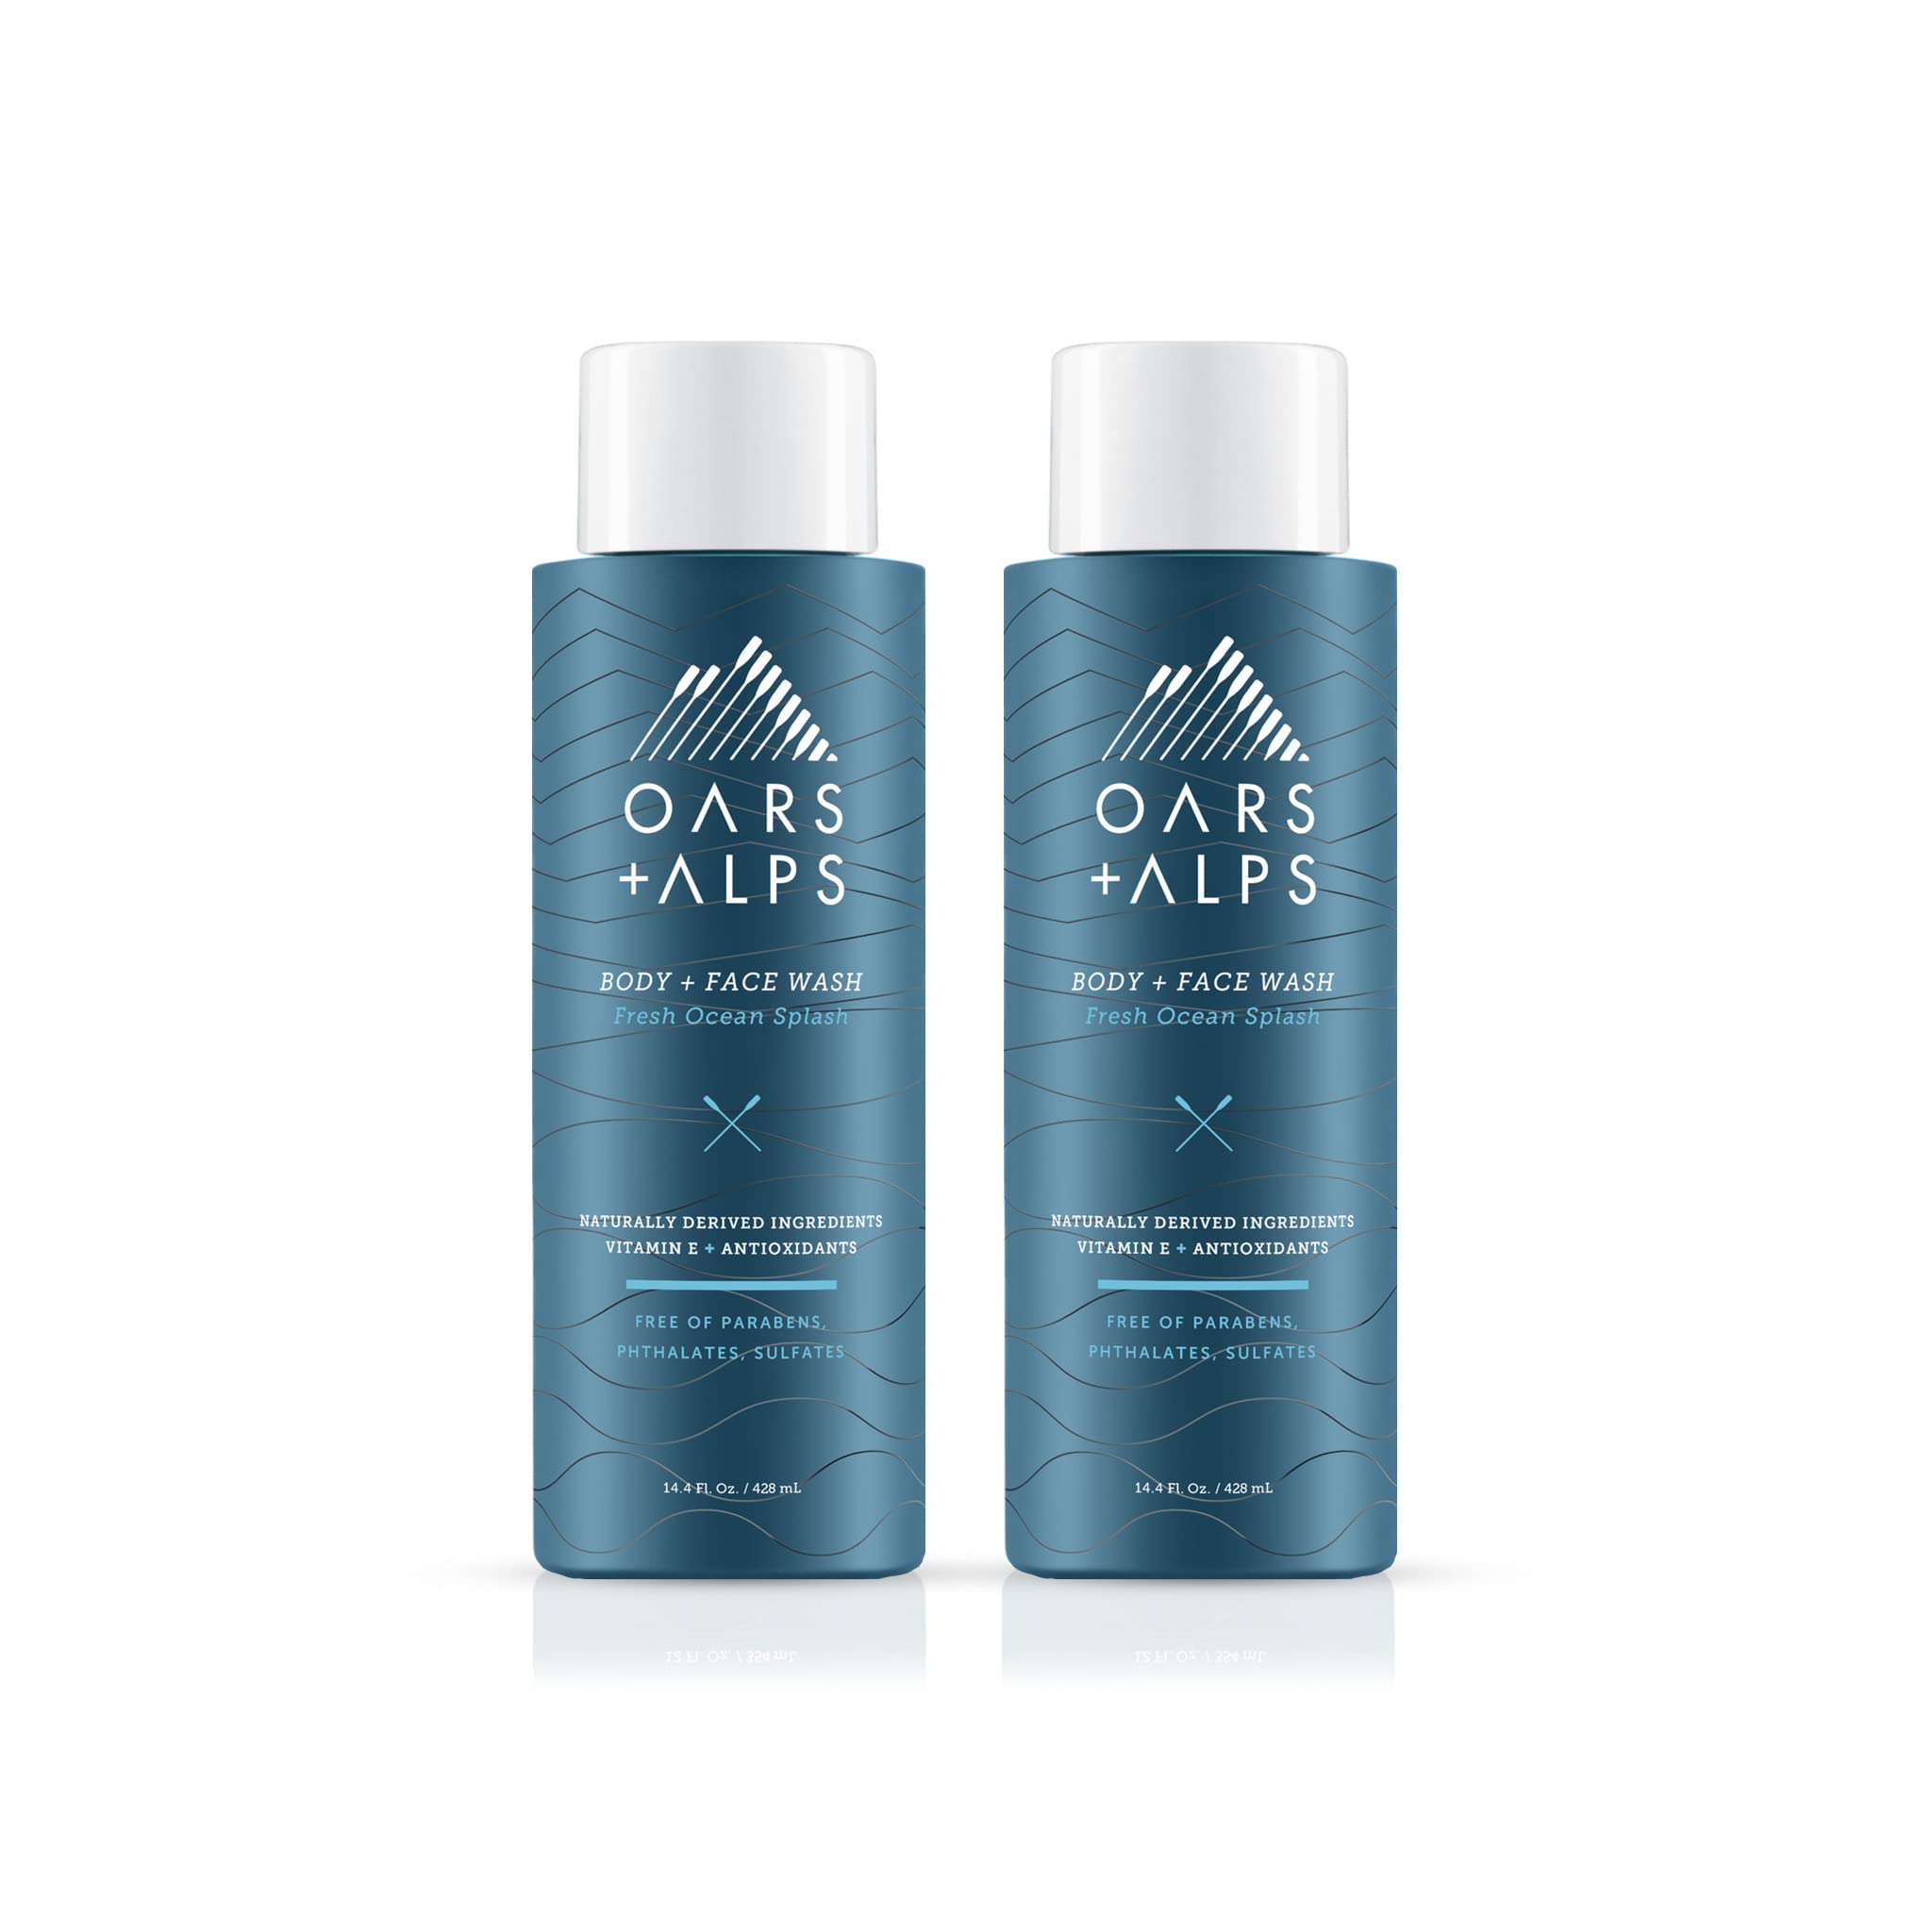 Oars + Alps Mens Moisturizing Body and Face Wash, Skin Care Infused with Vitamin E and Antioxidants, Sulfate Free, Fresh Ocean Splash, 2 Pack